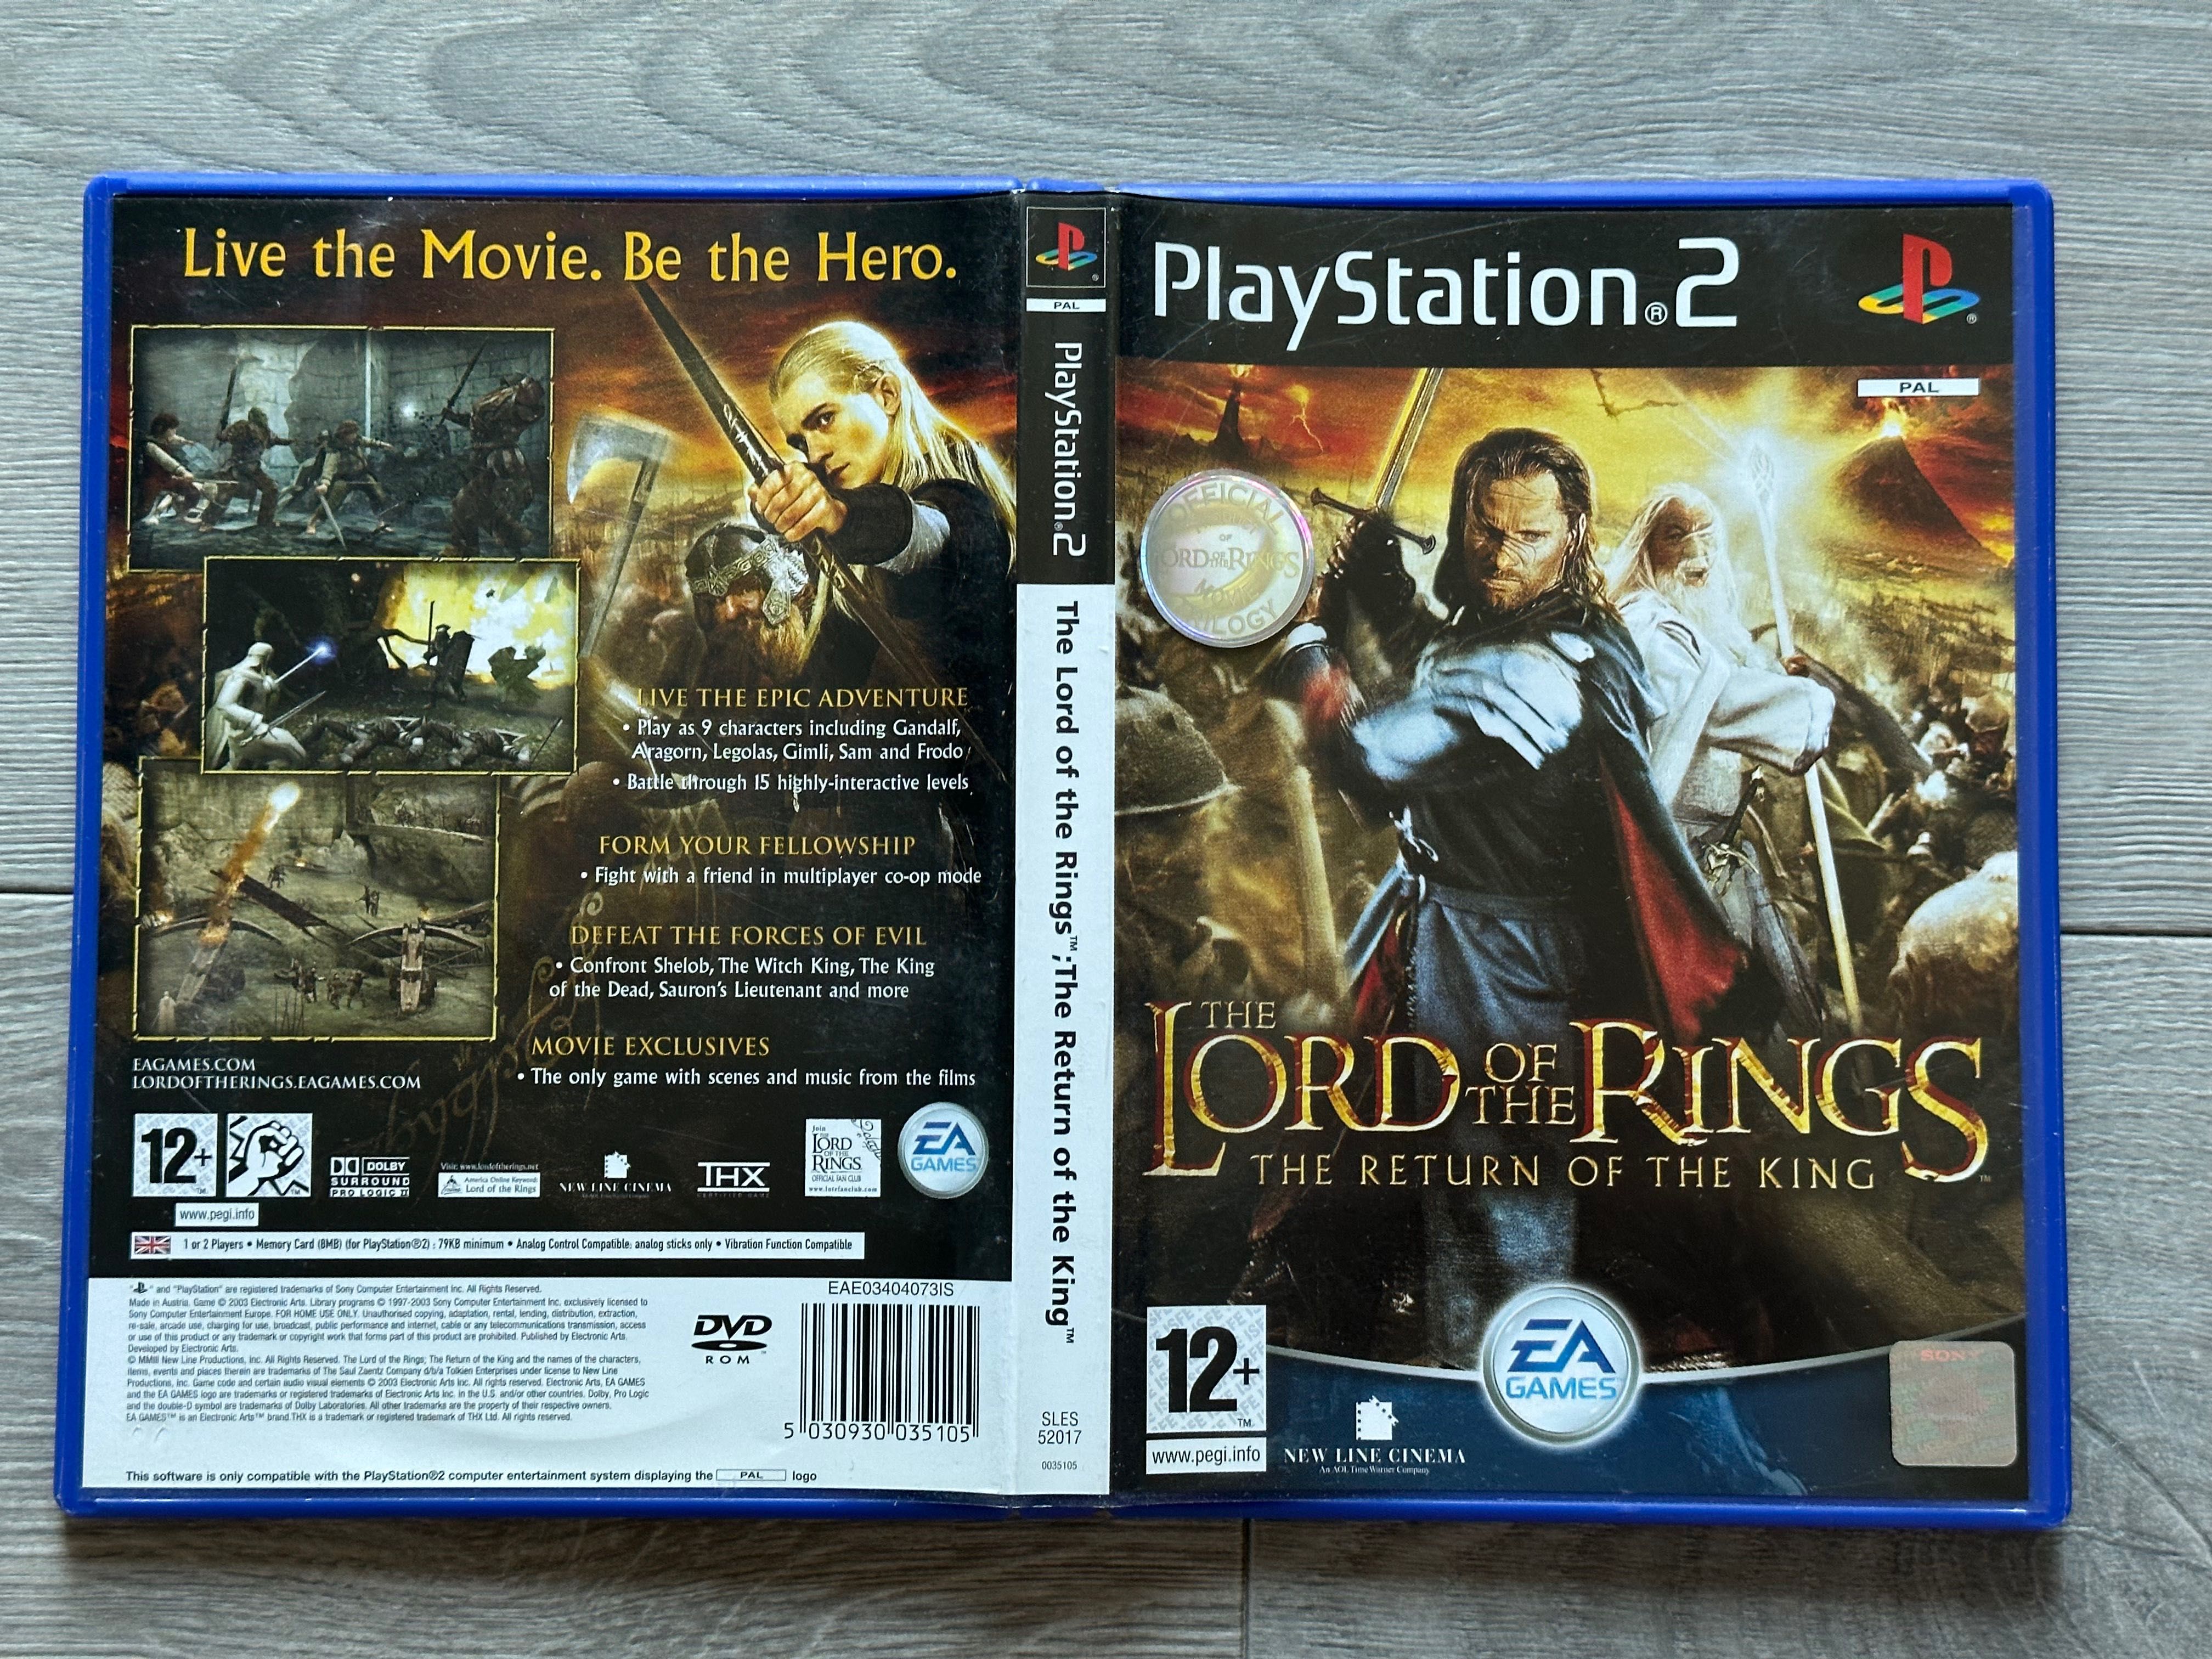 The Lord of the Rings: The Return of the King / Playstation 2